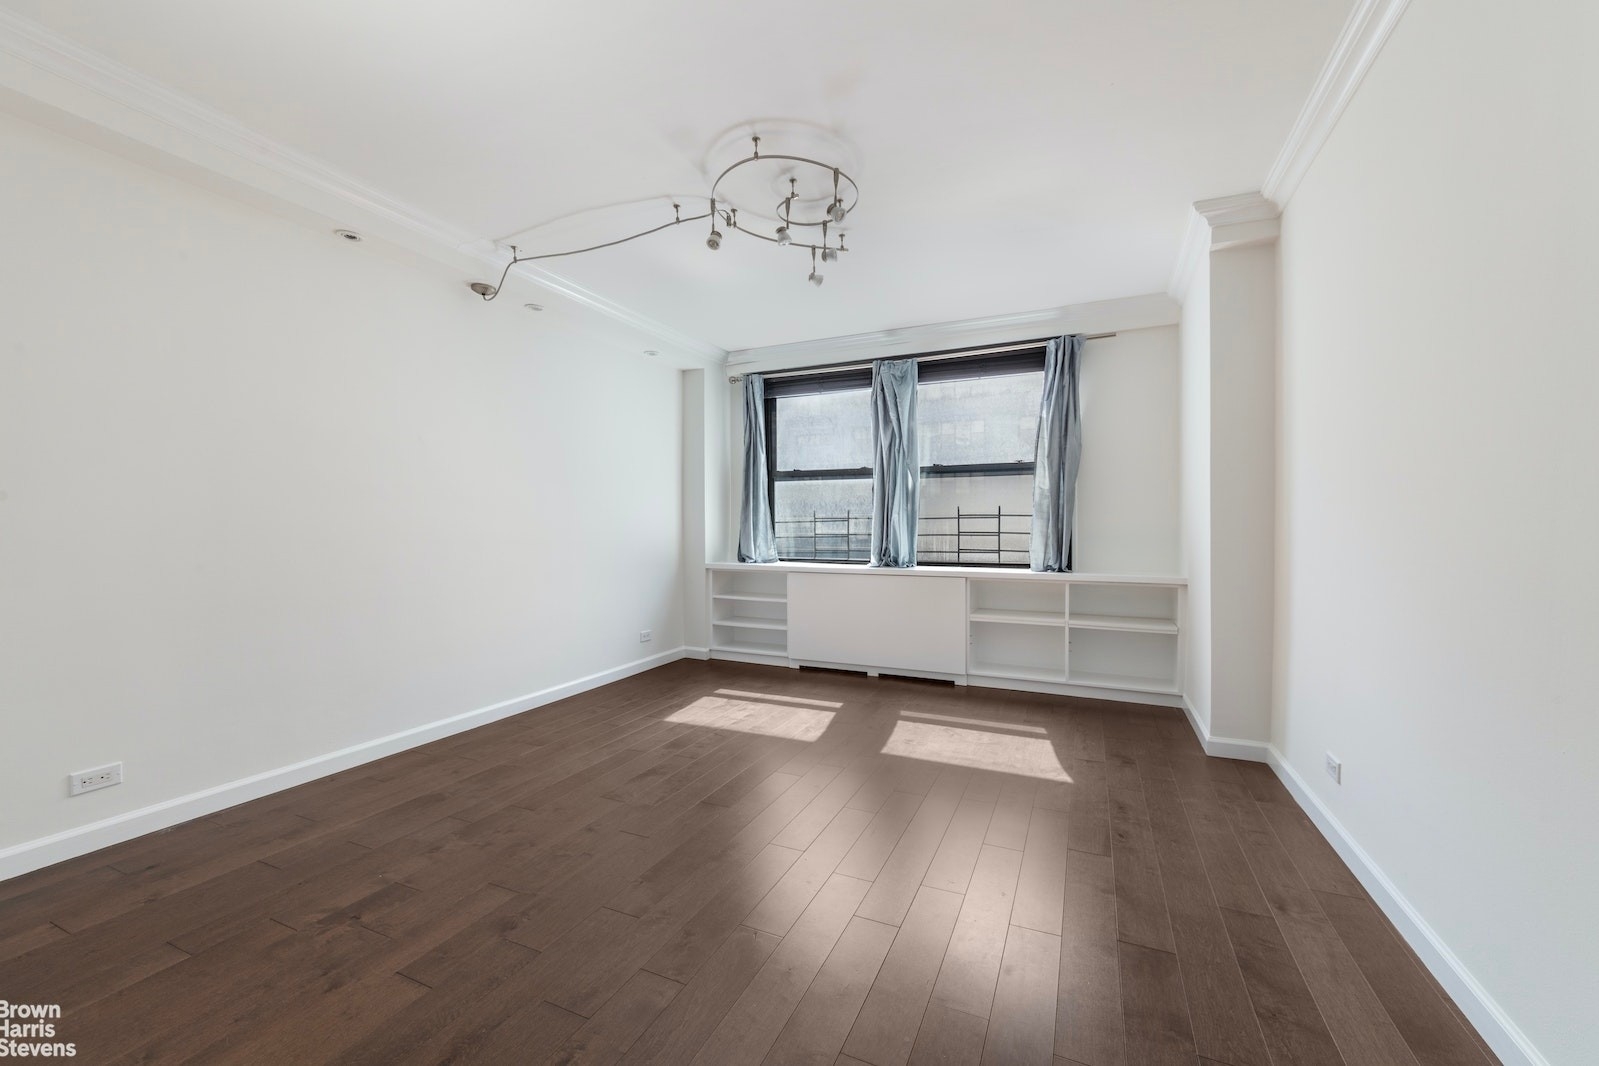 7. Co-op Properties for Sale at Harridge House, 225 E 57TH ST, 14F Midtown East, New York, New York 10022